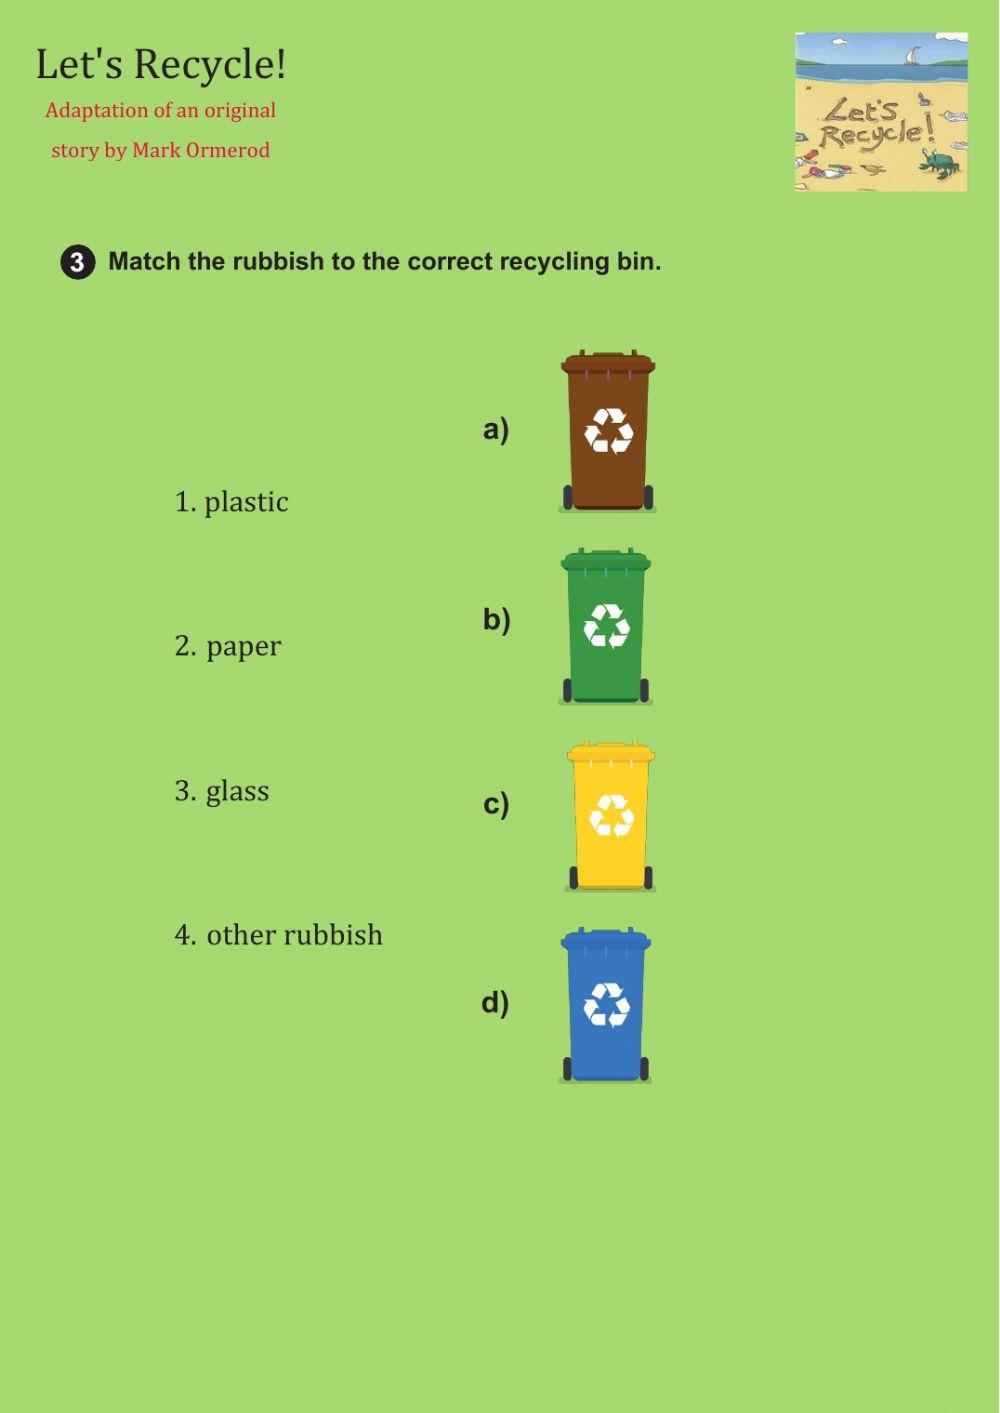 Let's recycle!